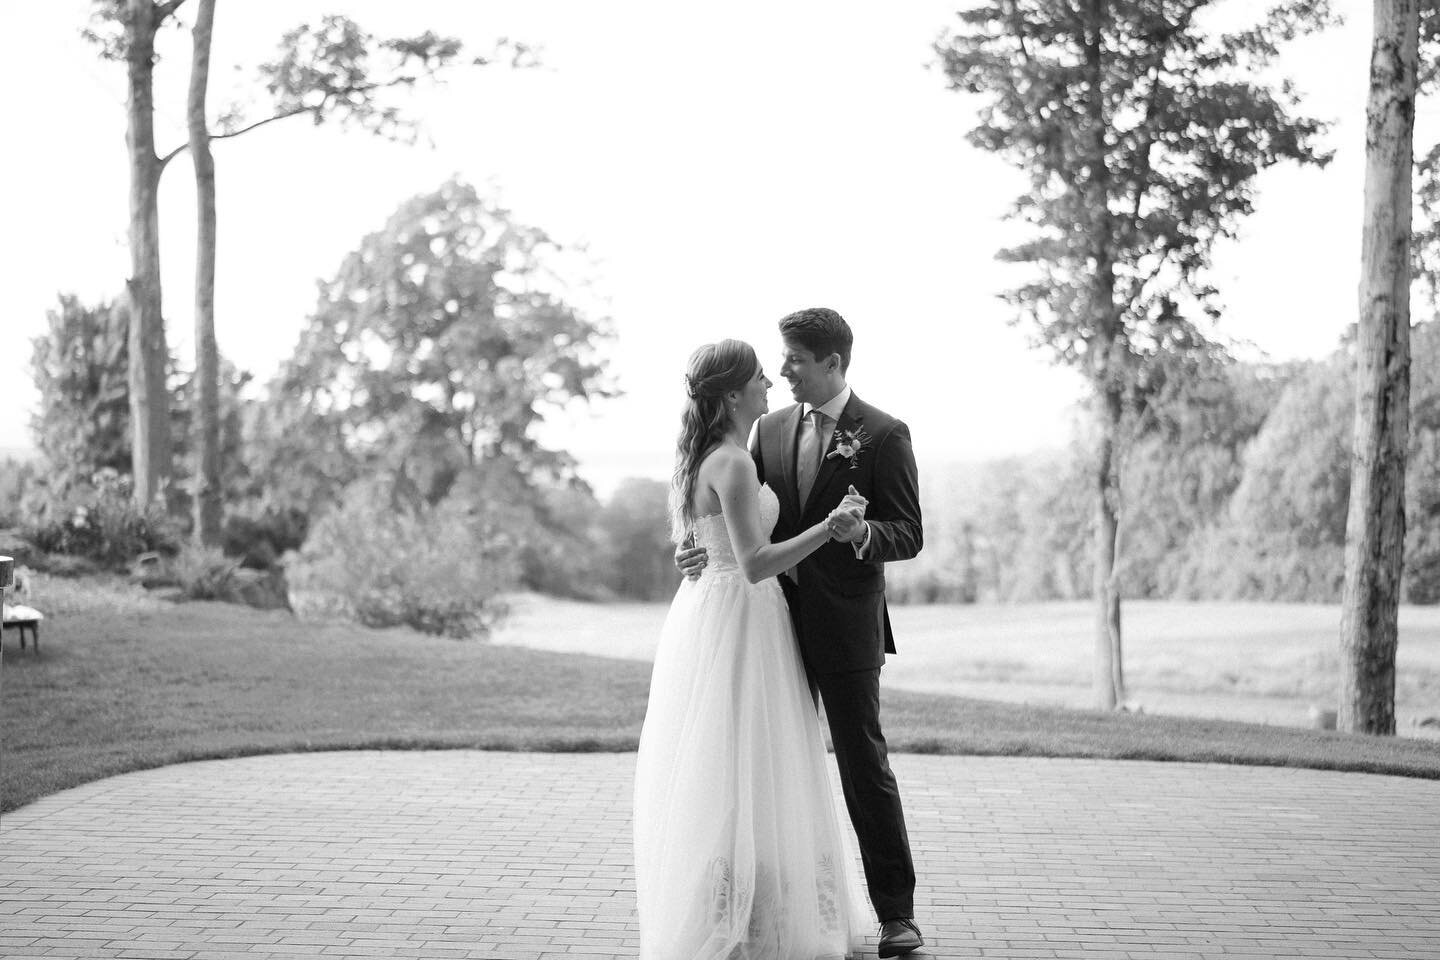 August 20th. Feels like a year ago already, but what a perfect day. I&rsquo;ll never get over the look on her face, and how lucky I am to have her beside me. Always.

📸: @hannahmezzadriphoto